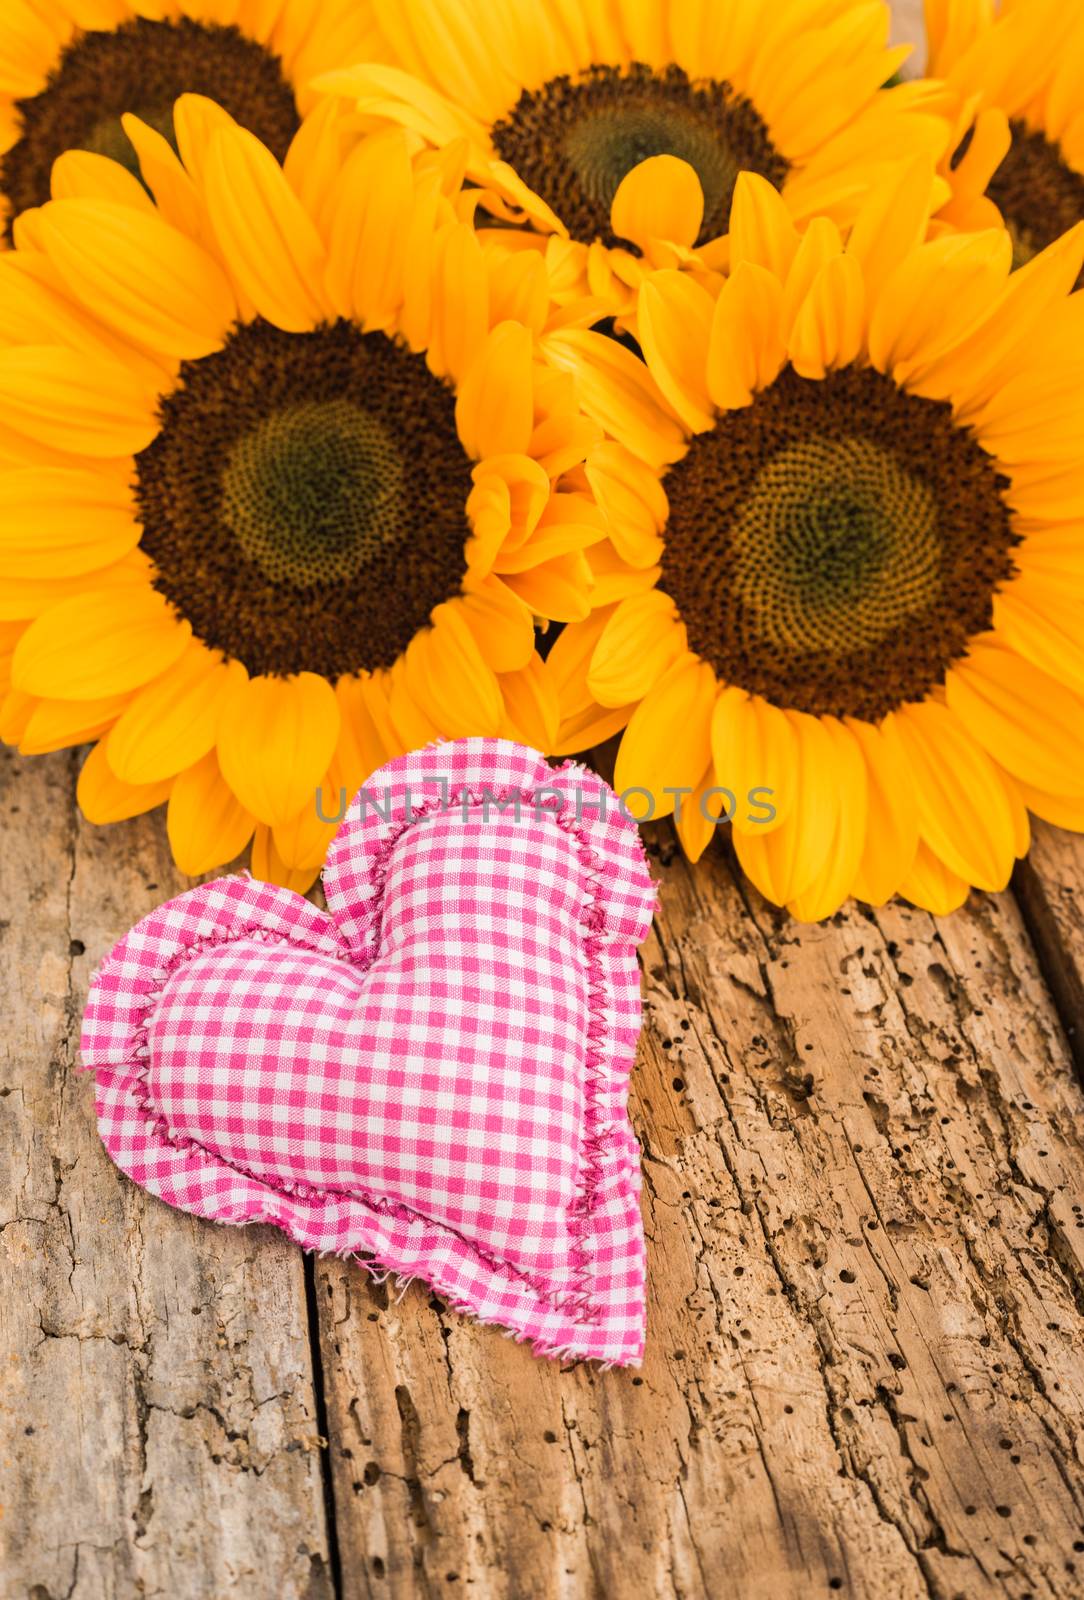 Romantic heart and beautiful yellow sunflowers arrangement on rustic wooden background